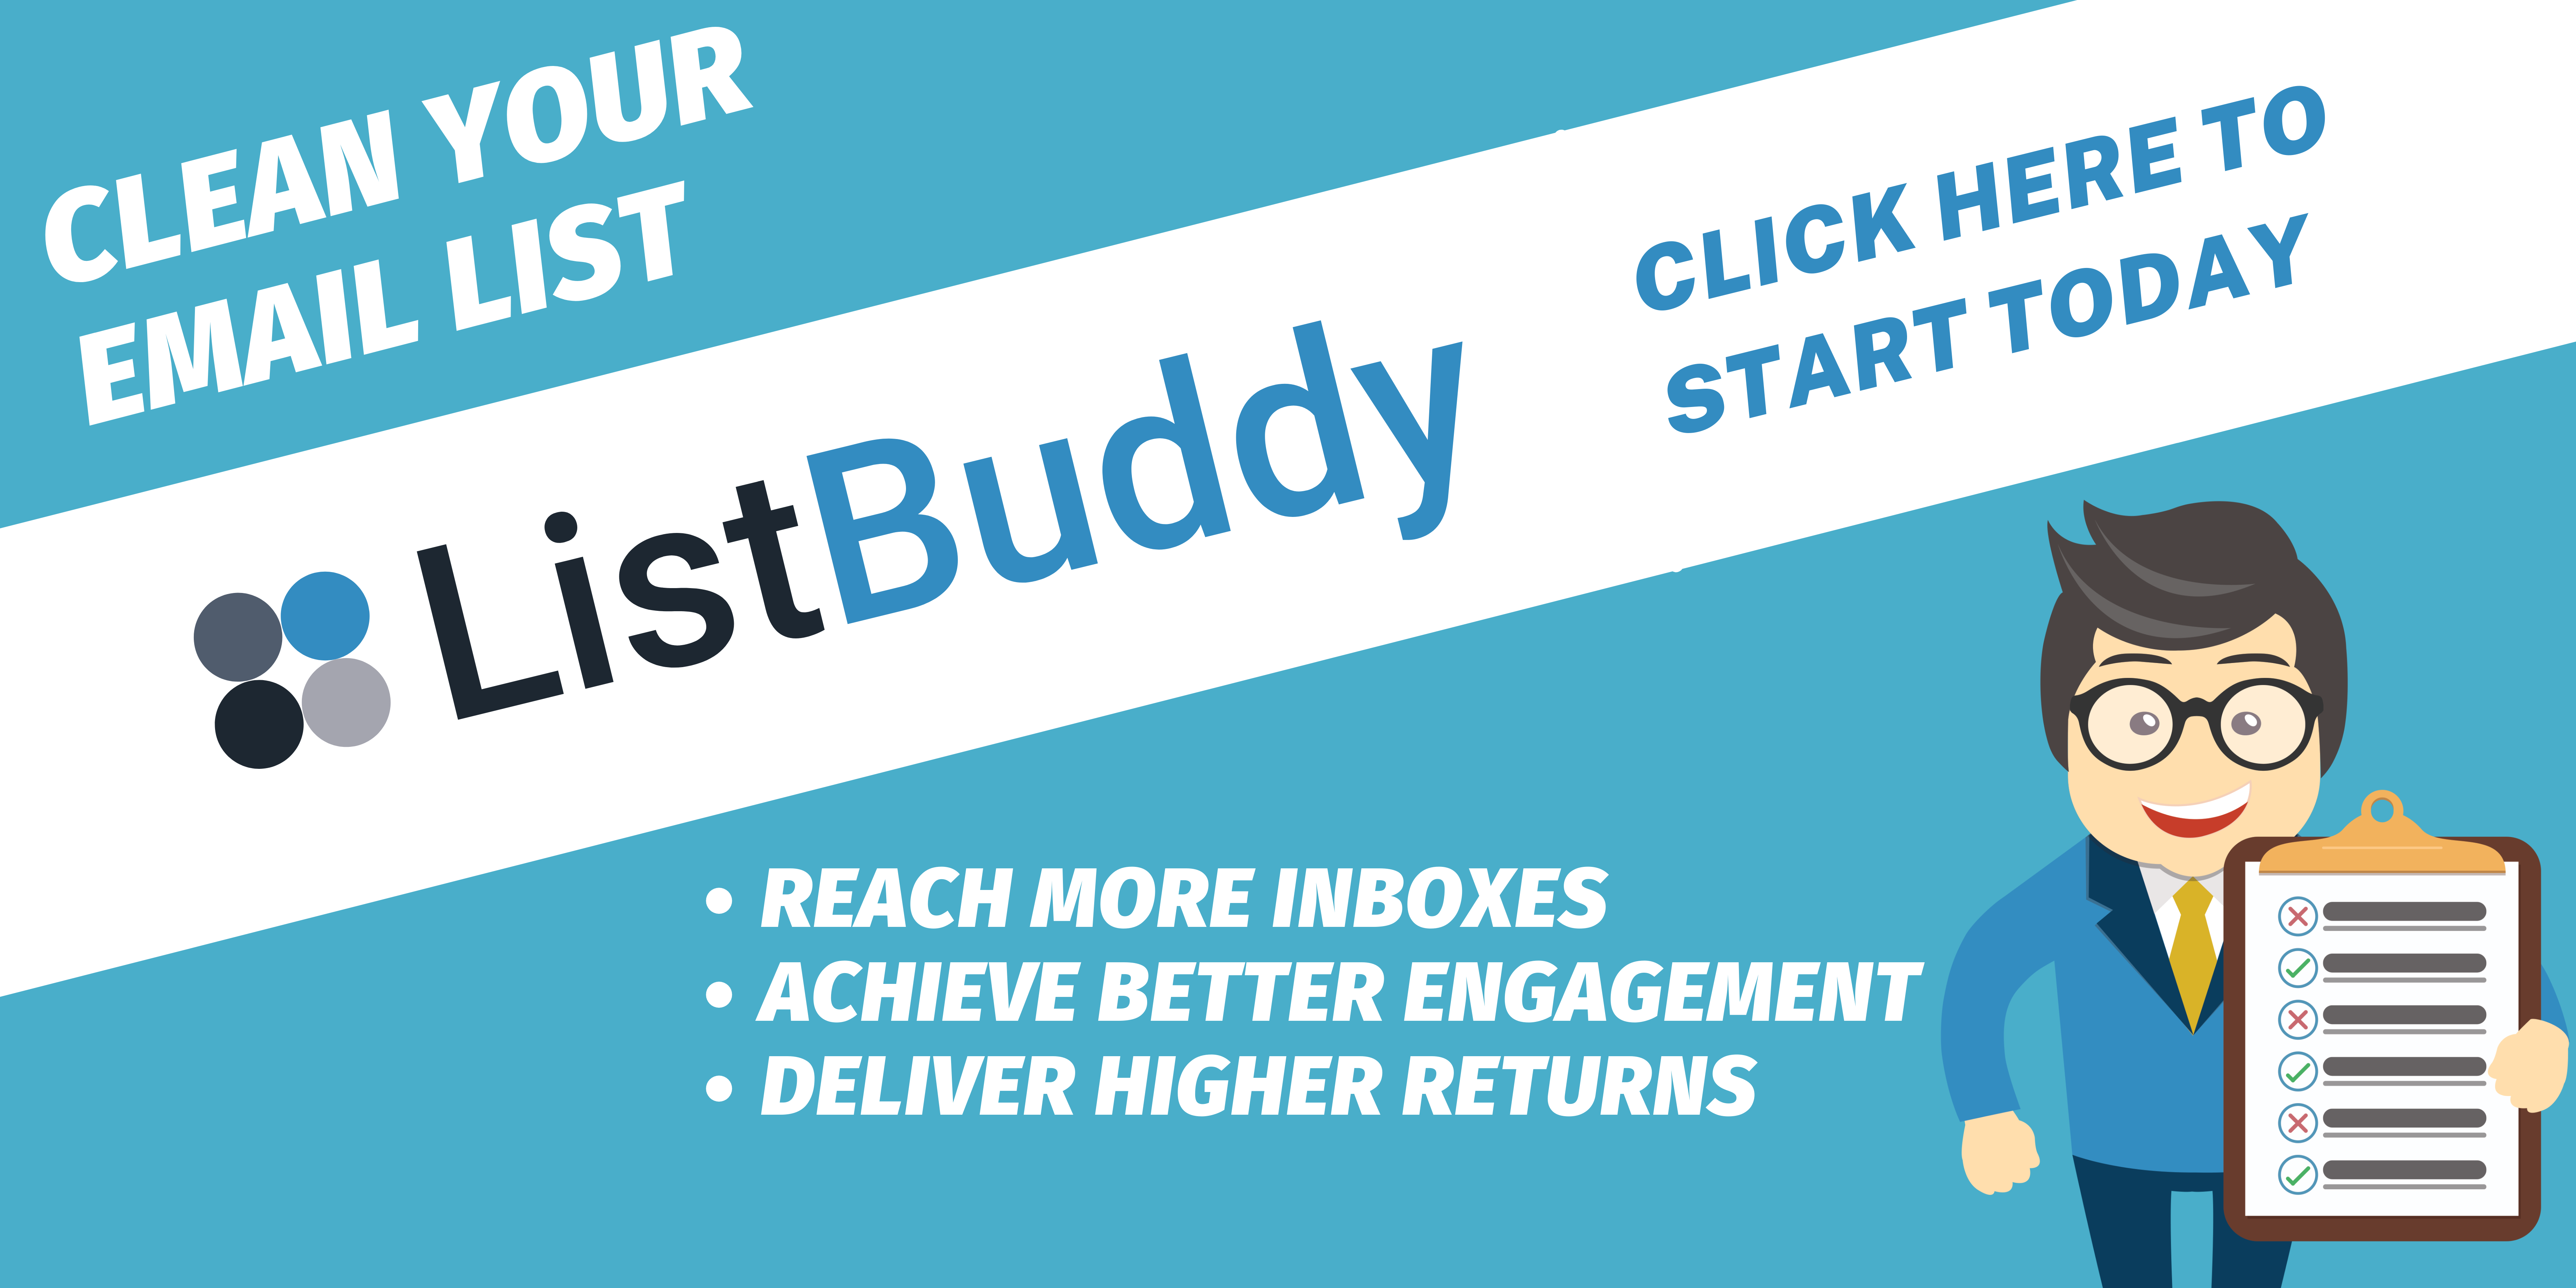 Sign up for ListBuddy today